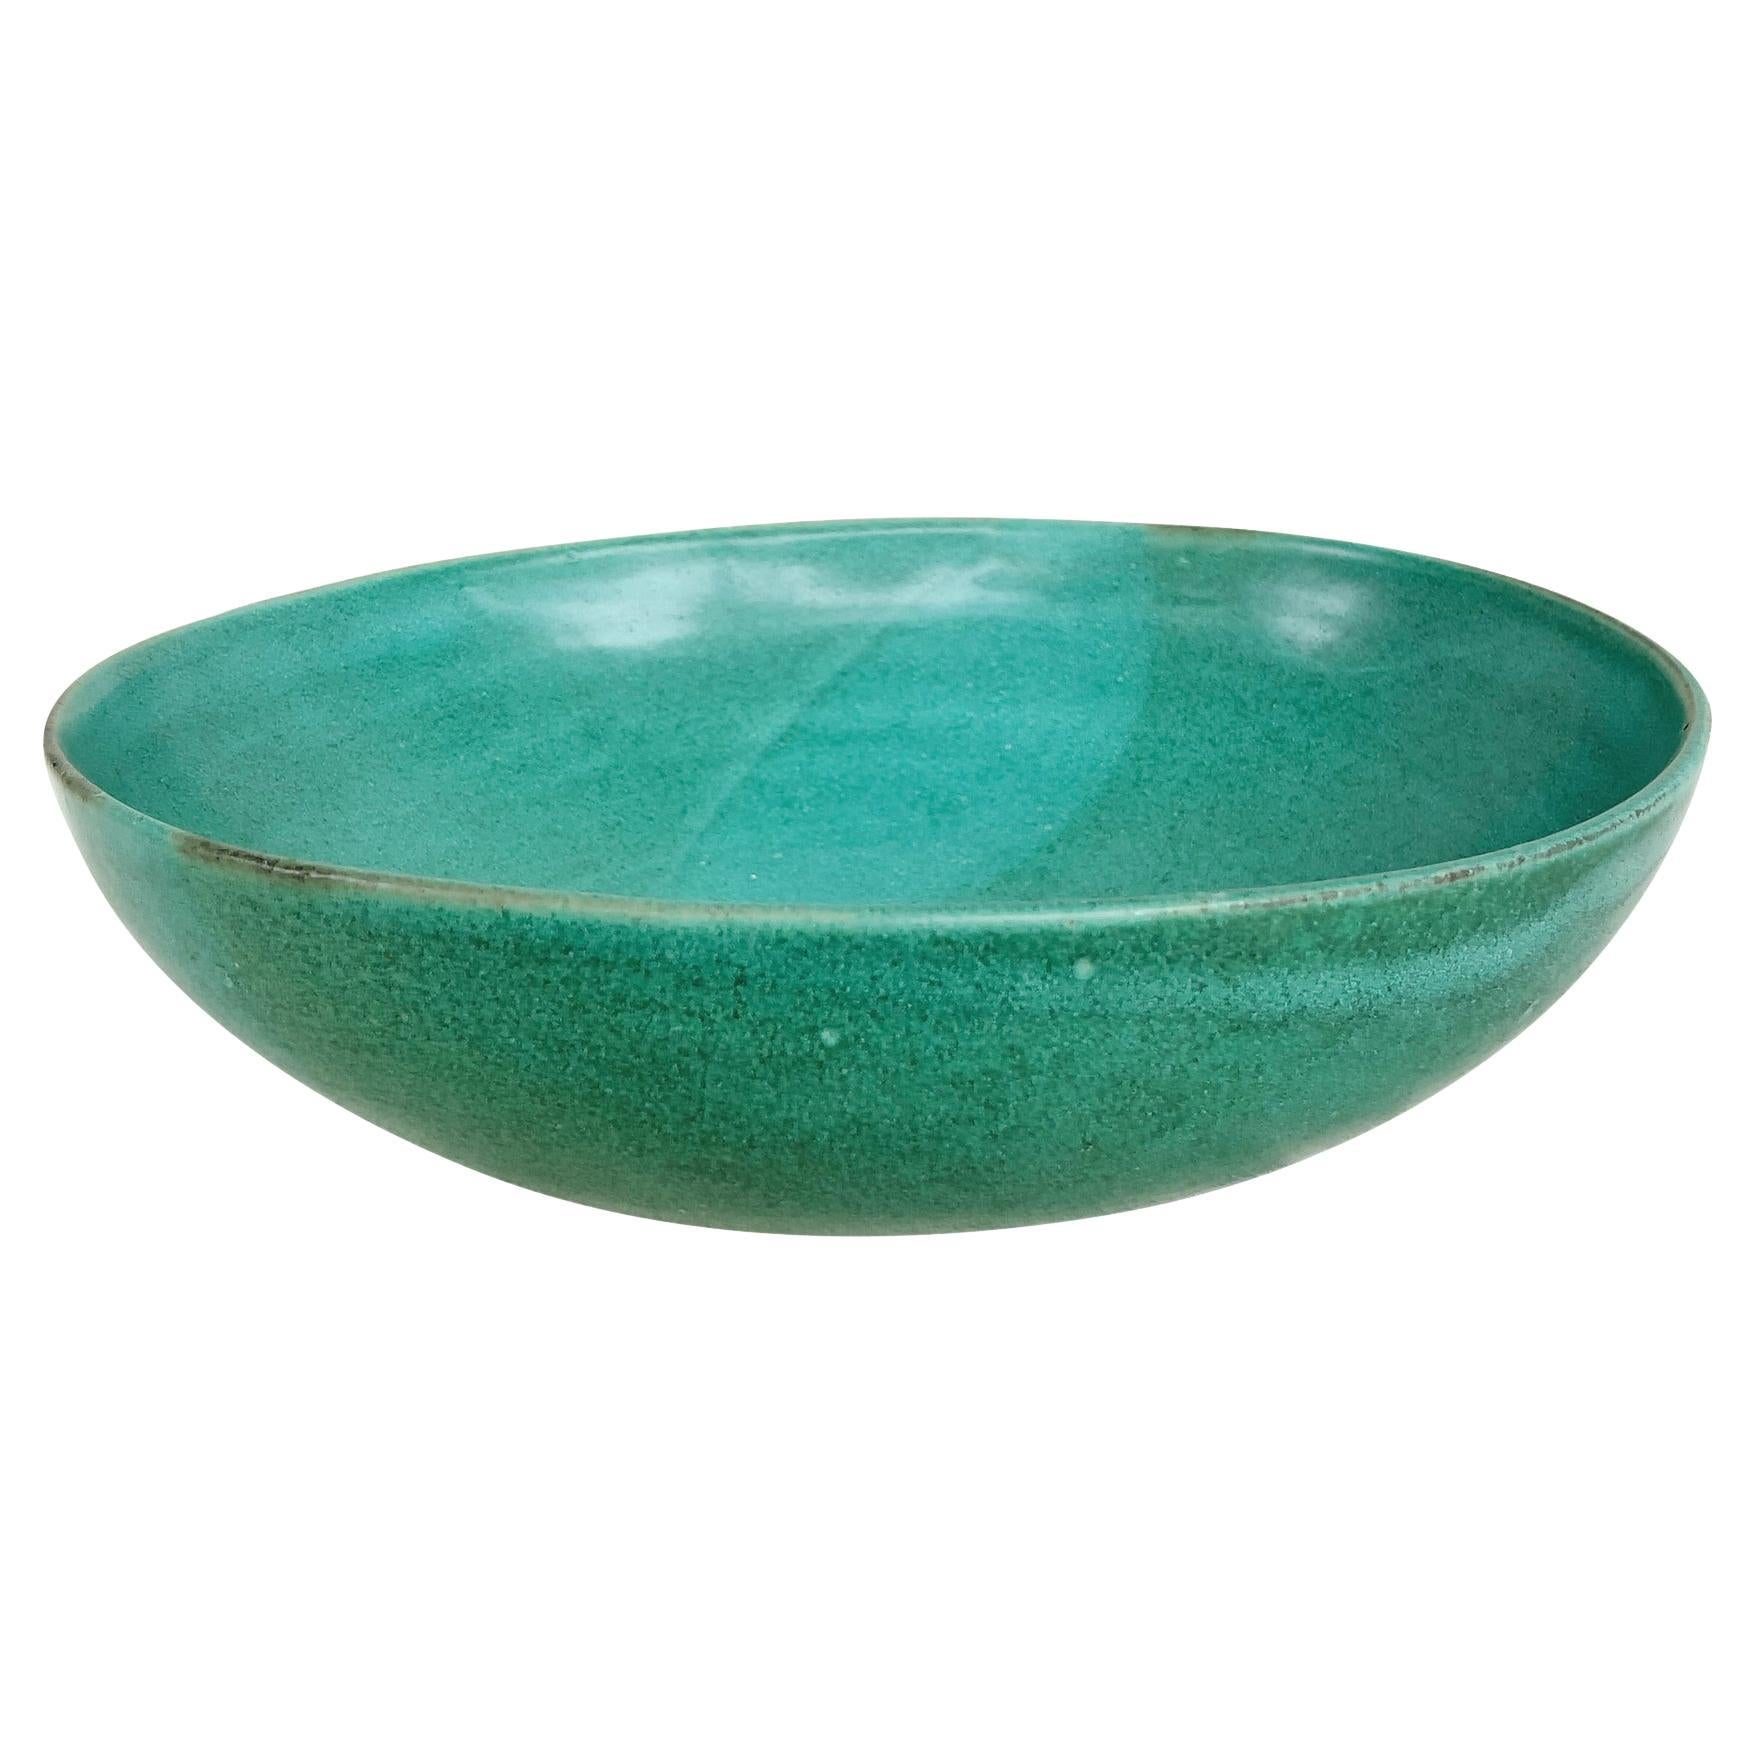 Thom Lussier Ceramic Bowl #28, from the Oxidized Copper Collection For Sale